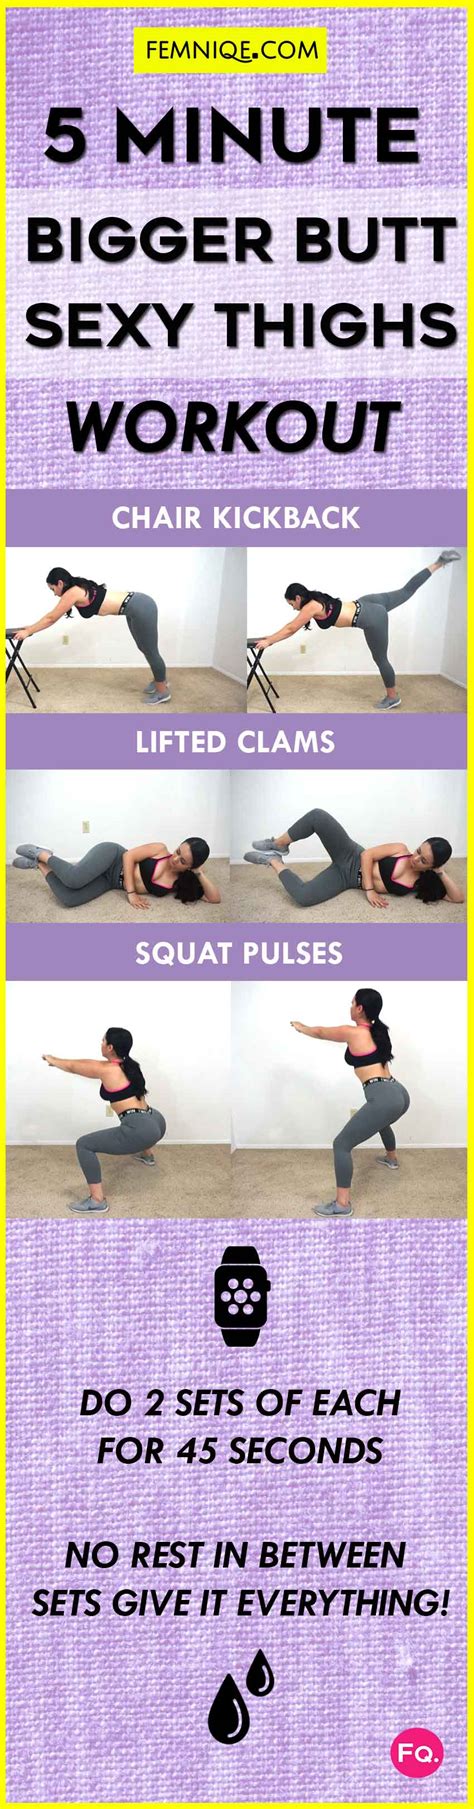 5 Minute Bigger Butt And Thigh Workout Grow Glutes And Tone Legs